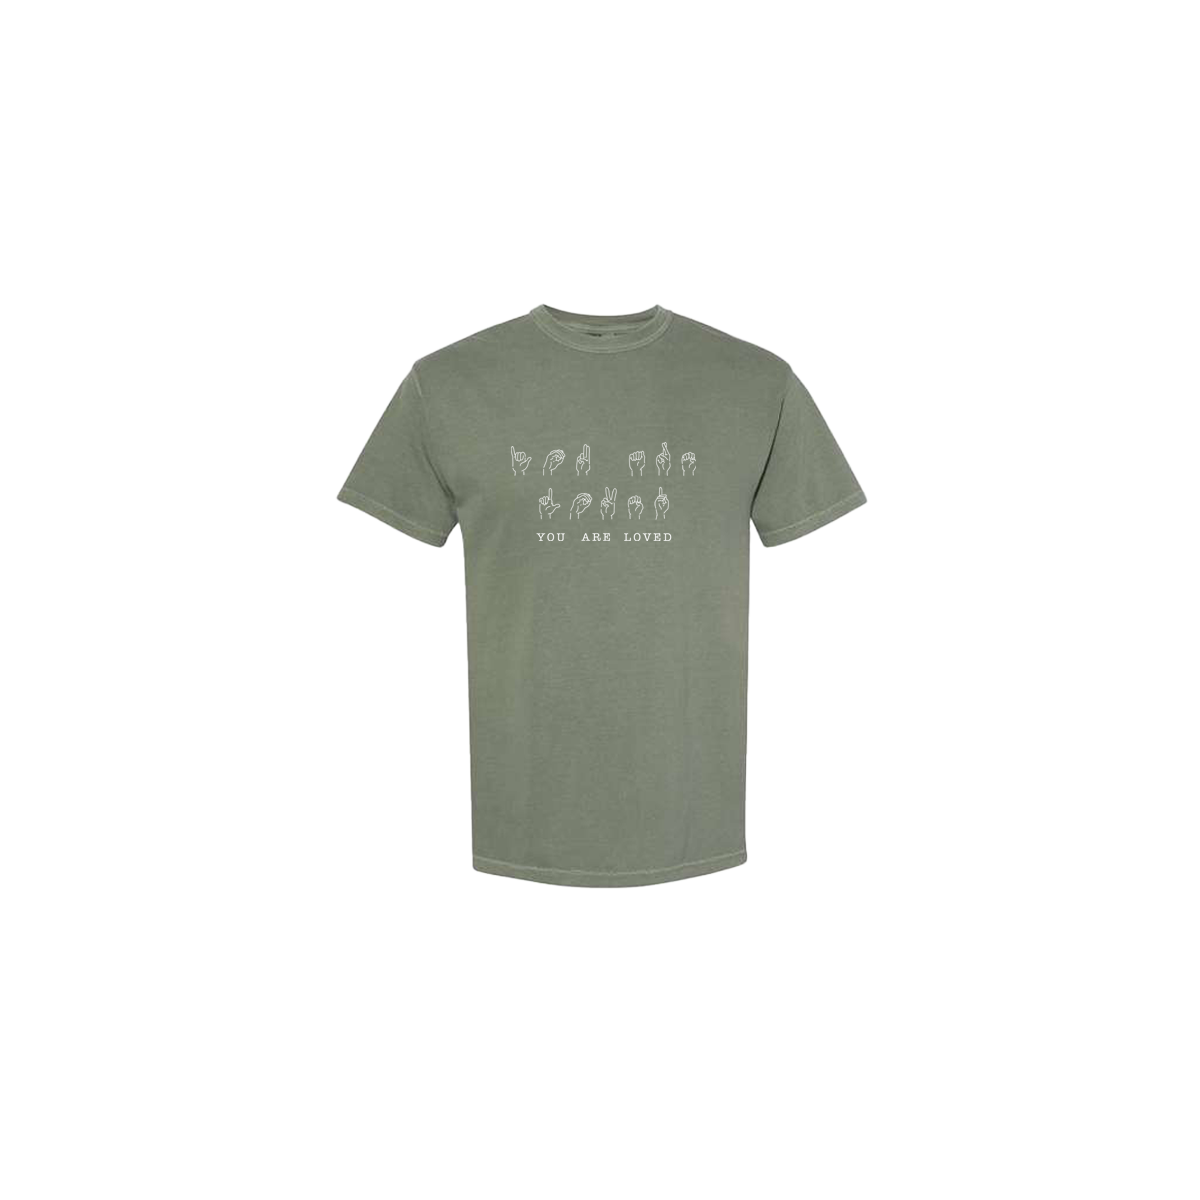 You Are Loved Sign Language Embroidered Army Green Tshirt - Mental Health Awareness Clothing